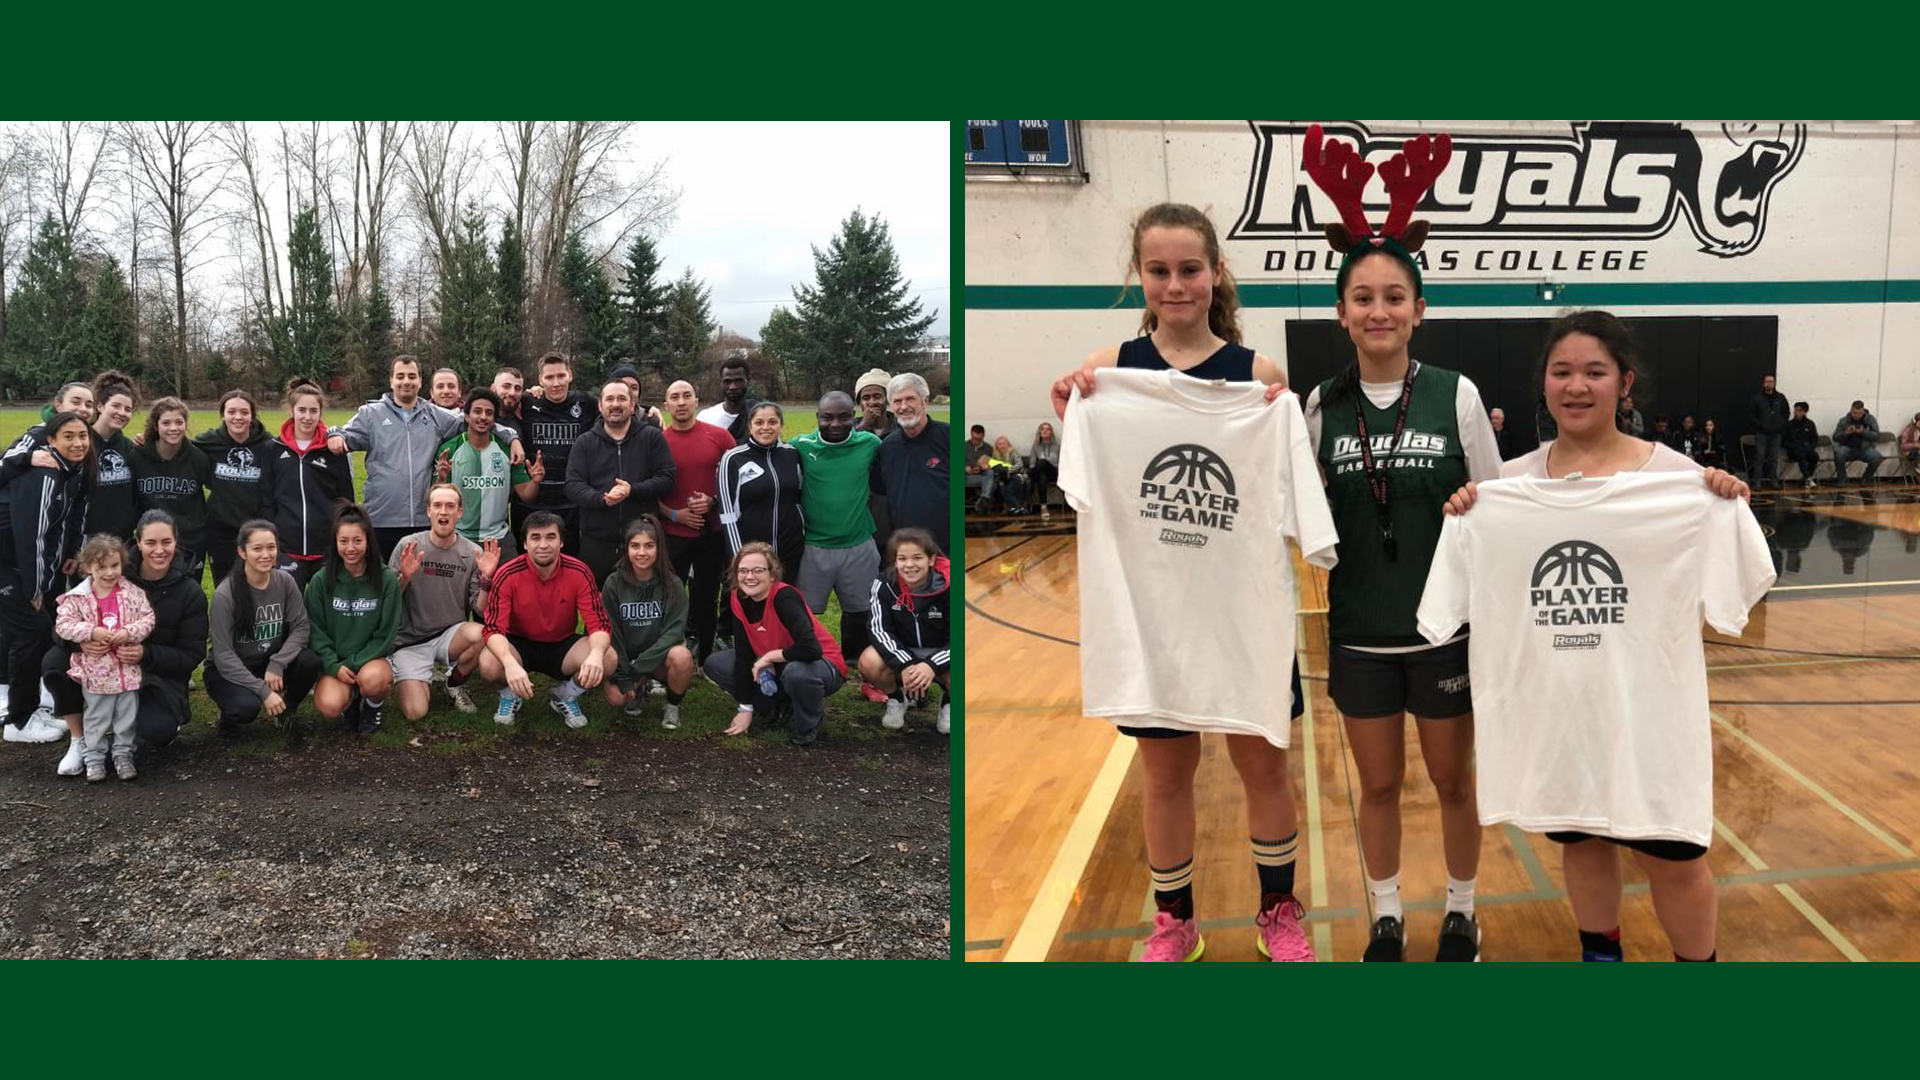 Women's Soccer (left) pictured with members from the VSSL program. Cassie Brinn (right) from the Women's Basketball team pictured awarding the players of the game during the tournament.